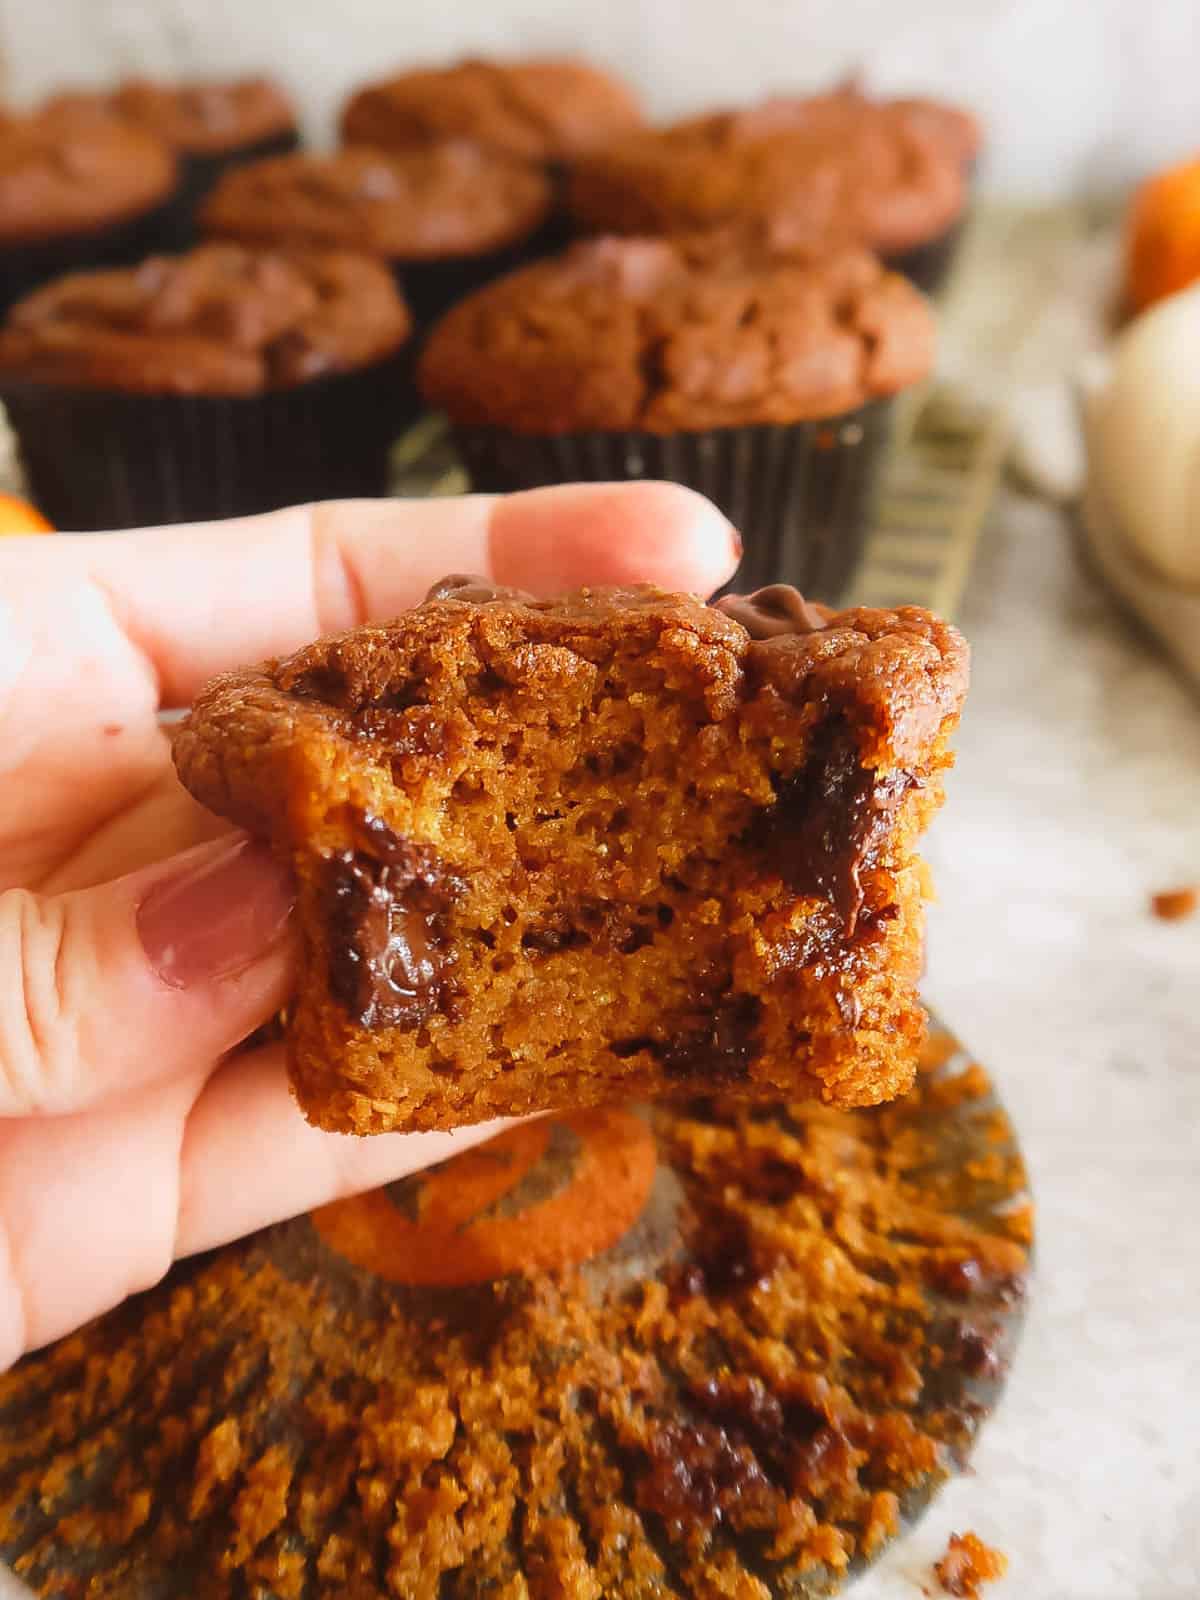 A bite taken out of a dairy-free pumpkin muffin with chocolate chips.